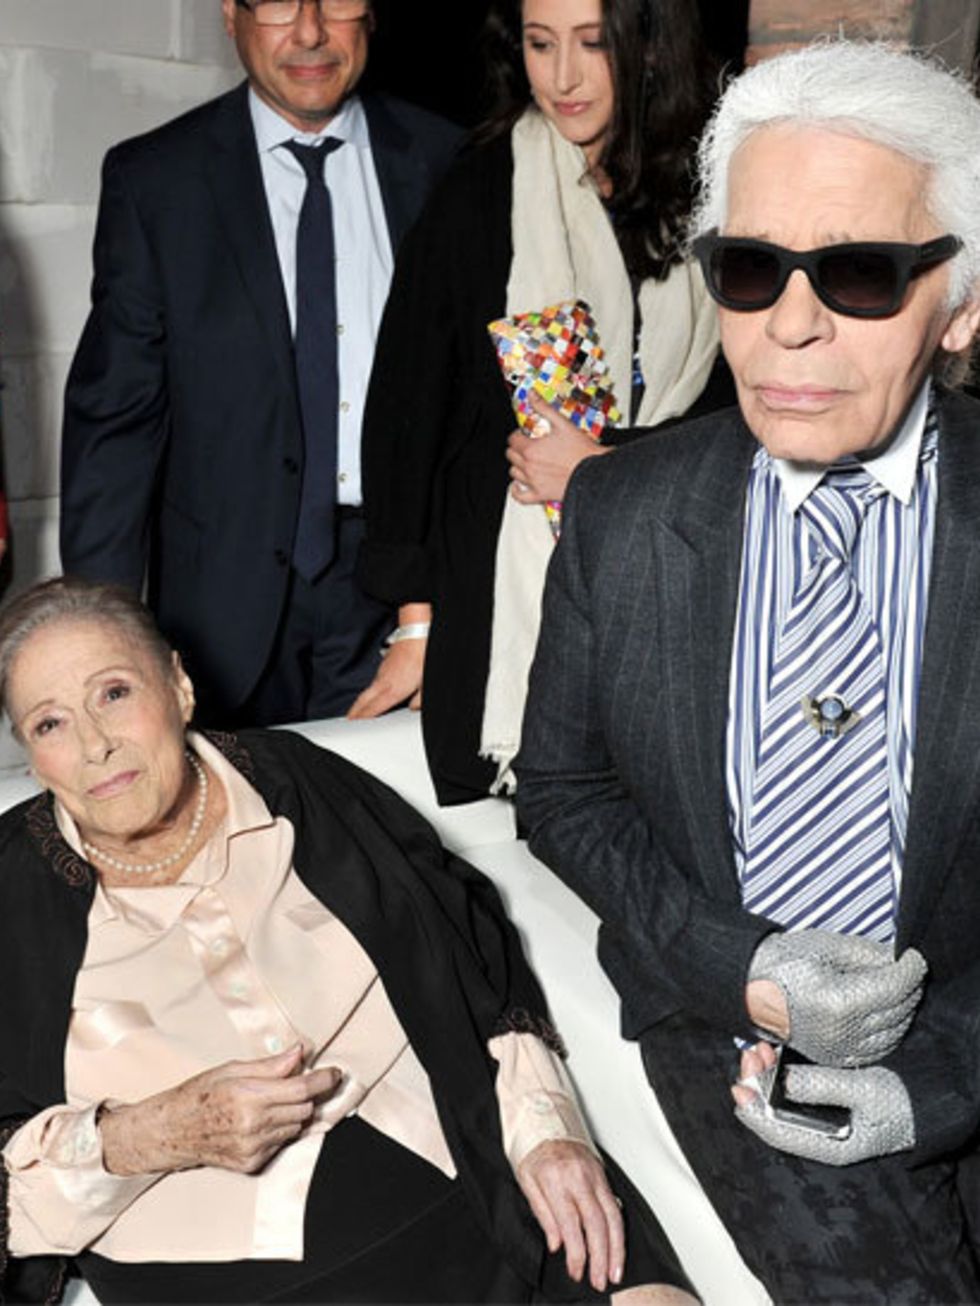 <p>Former Chloe designer <a href="http://www.elleuk.com/content/search?SearchText=Karl+Lagerfeld&amp;SearchButto">Karl Lagerfeld</a> and Chloe founder Gaby Aghion at the house's 60th anniversary party</p>